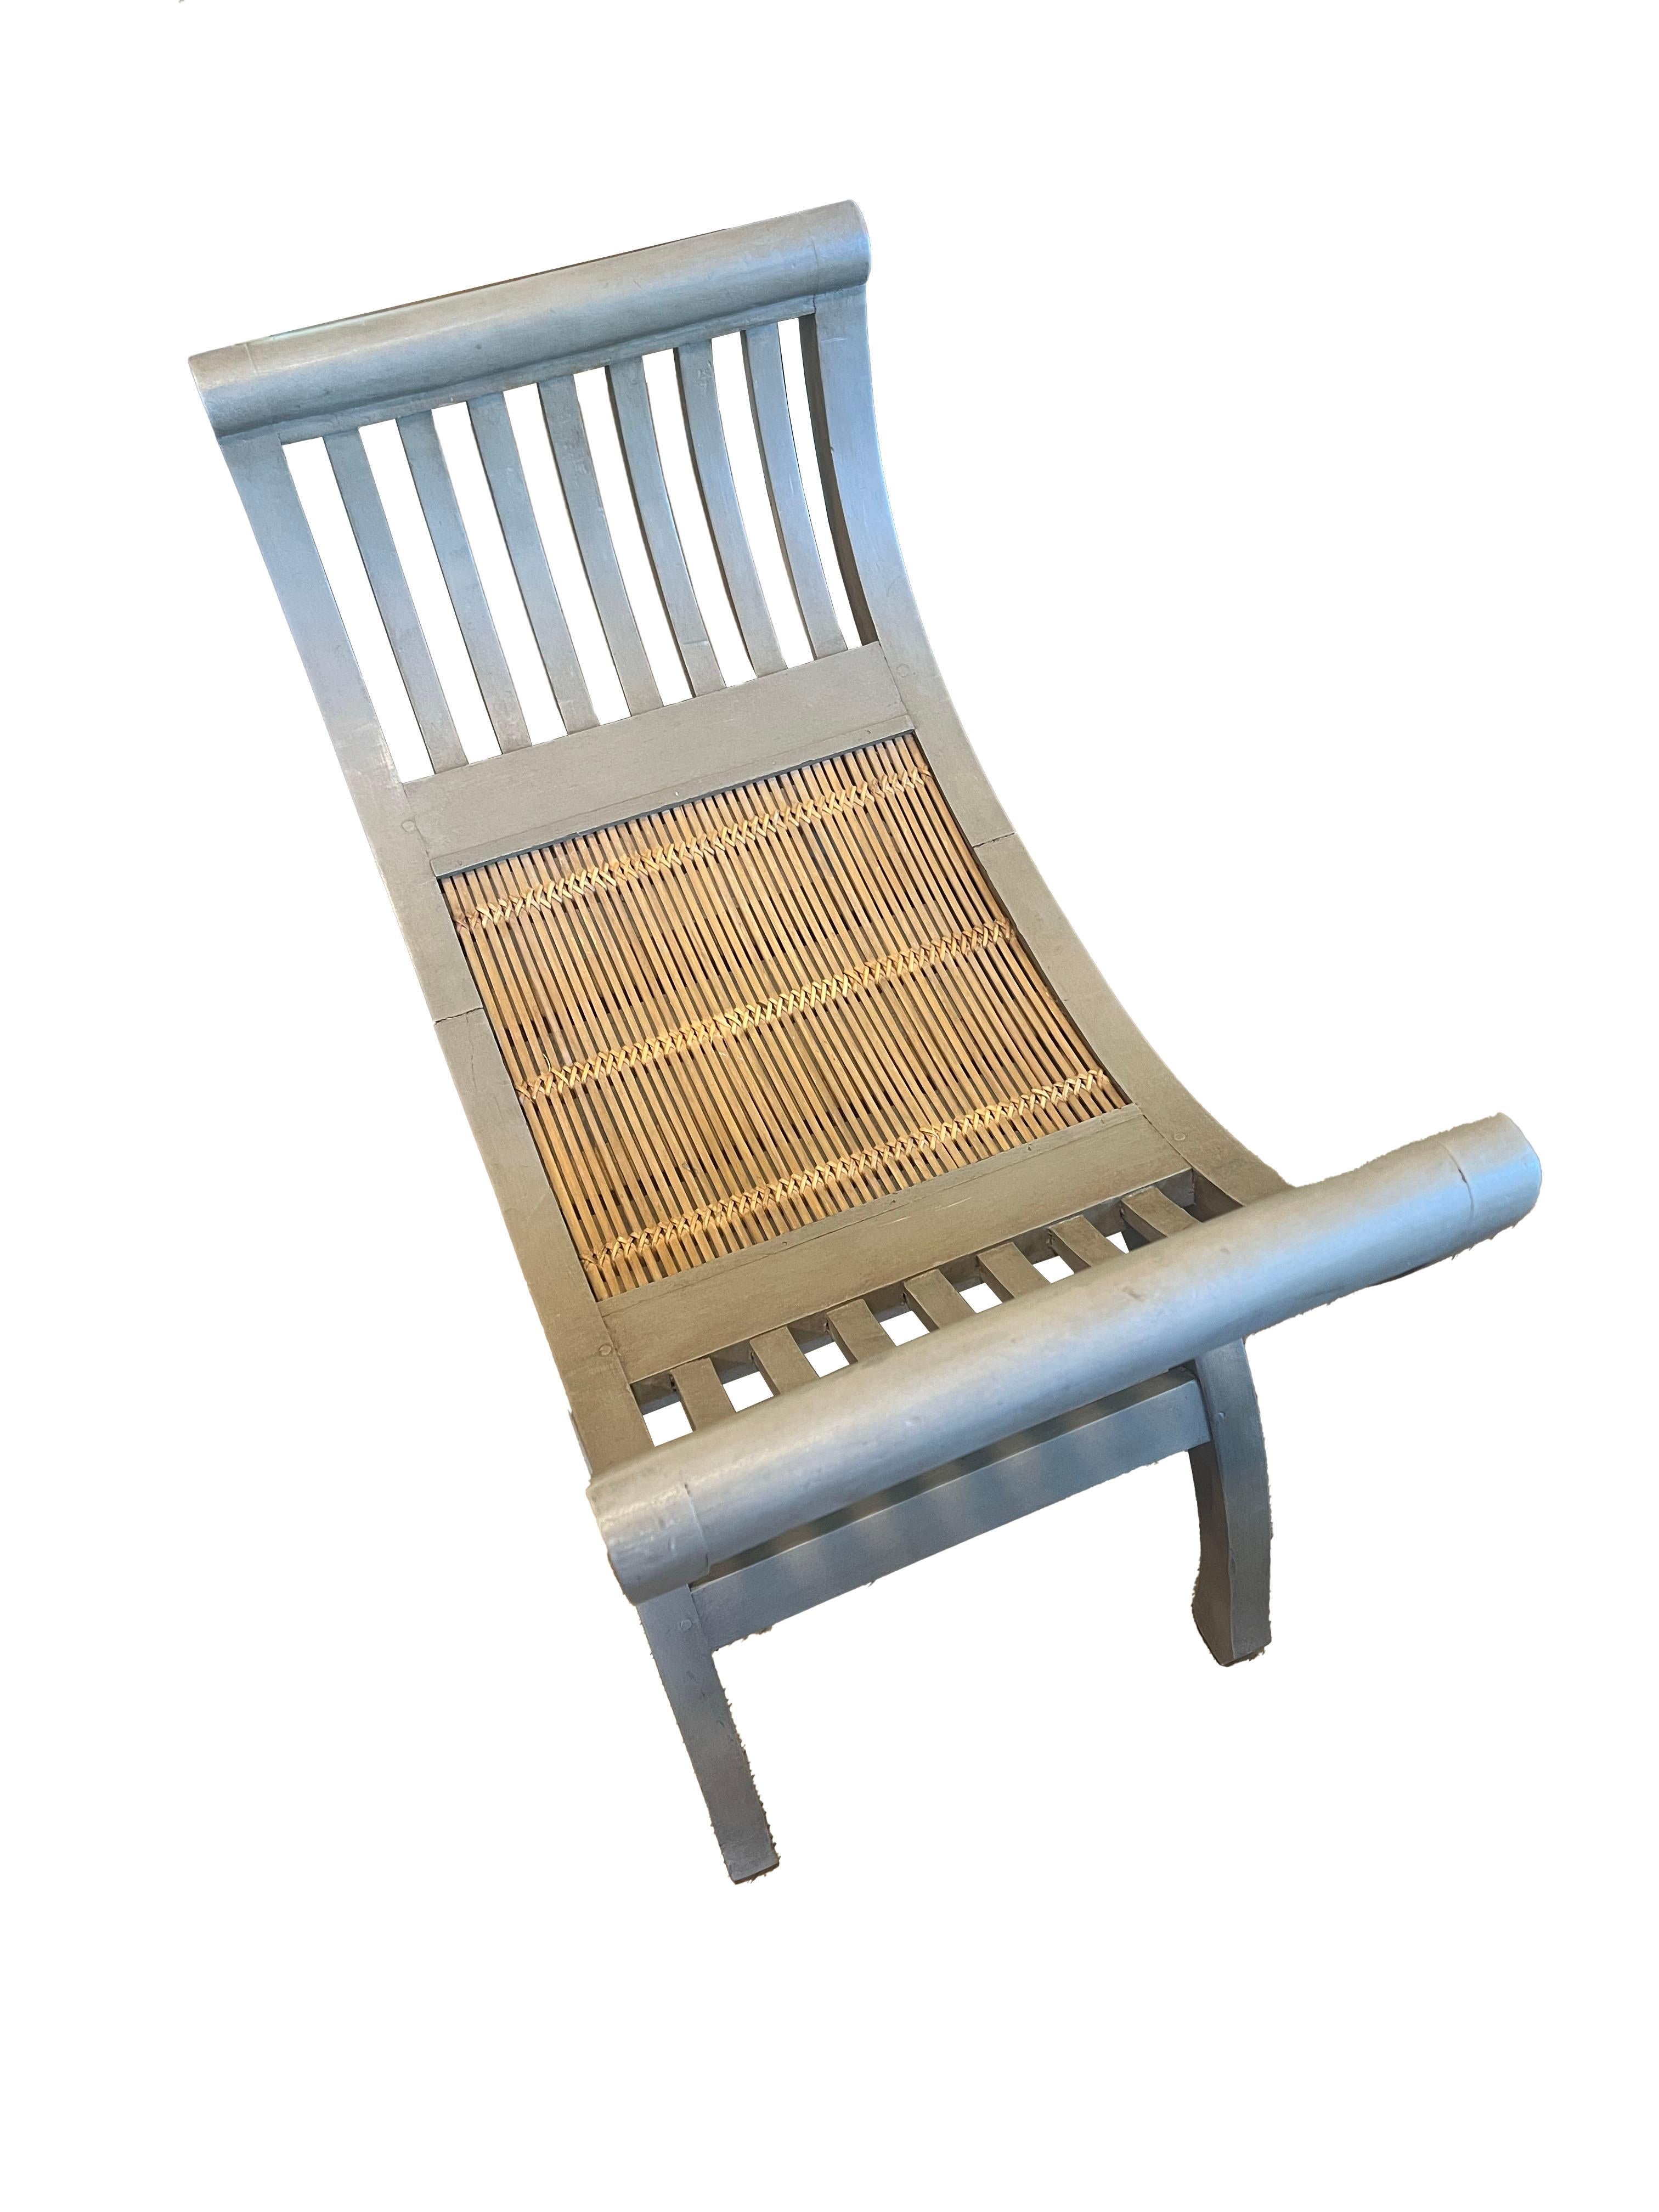 A stunning bench featuring a woven bamboo seat and a custom finish, exemplifying the perfect blend of artistry and functionality. The curved shape and silhouette of this bench add an exquisite touch to any space, enhancing its visual appeal and